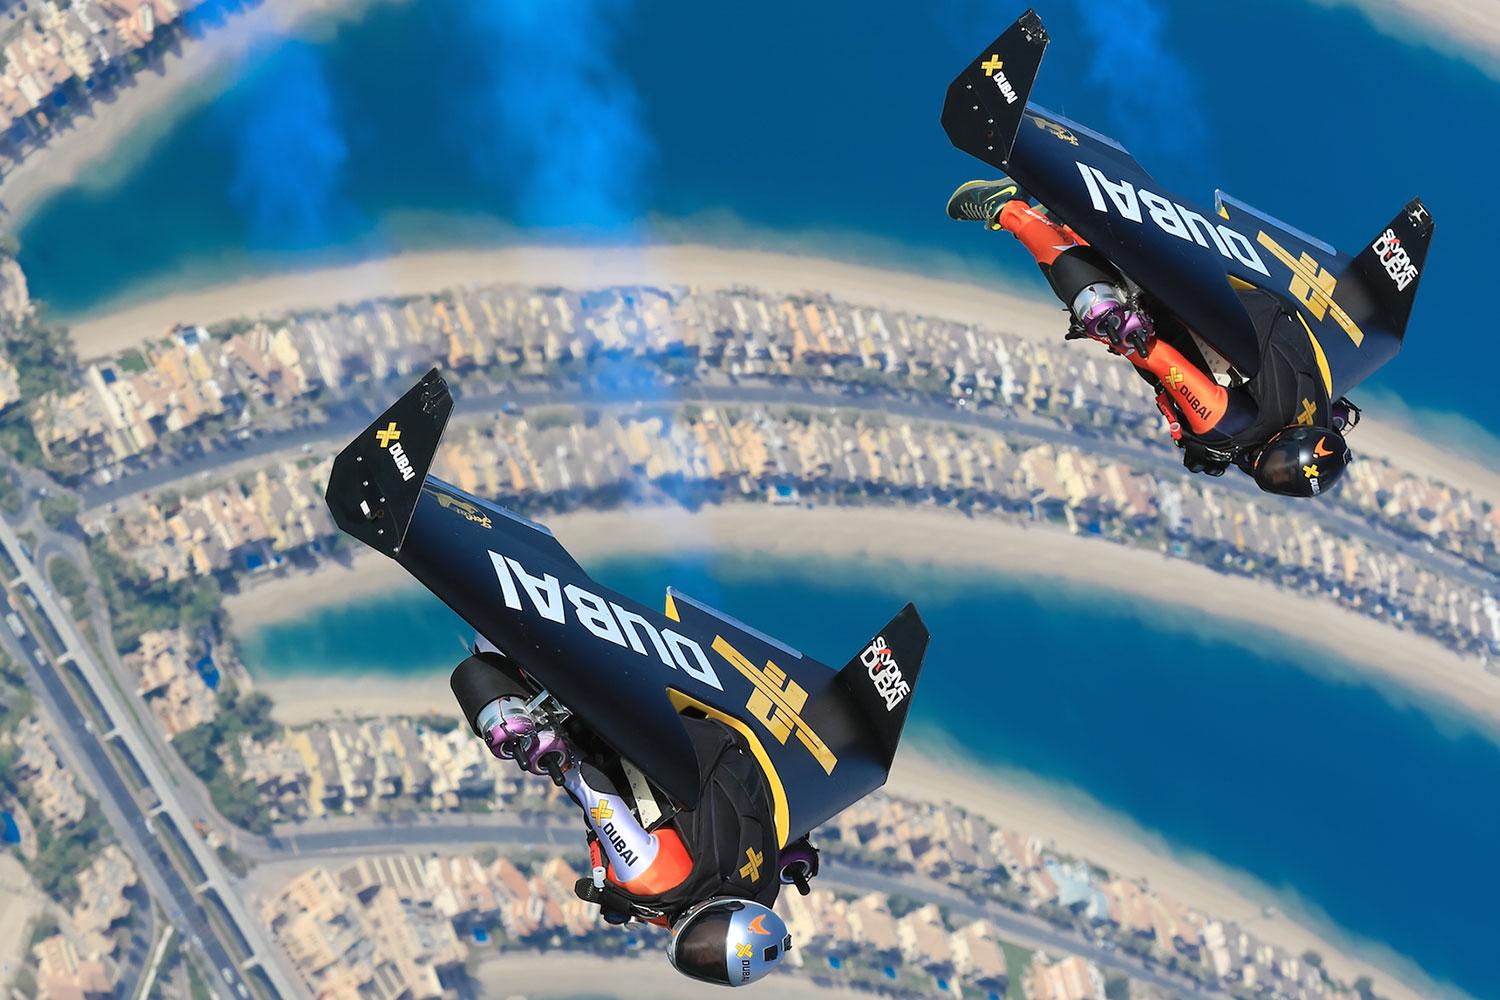 Dubai Company Debuts New Jetpack That Looks Straight Out of a Movie